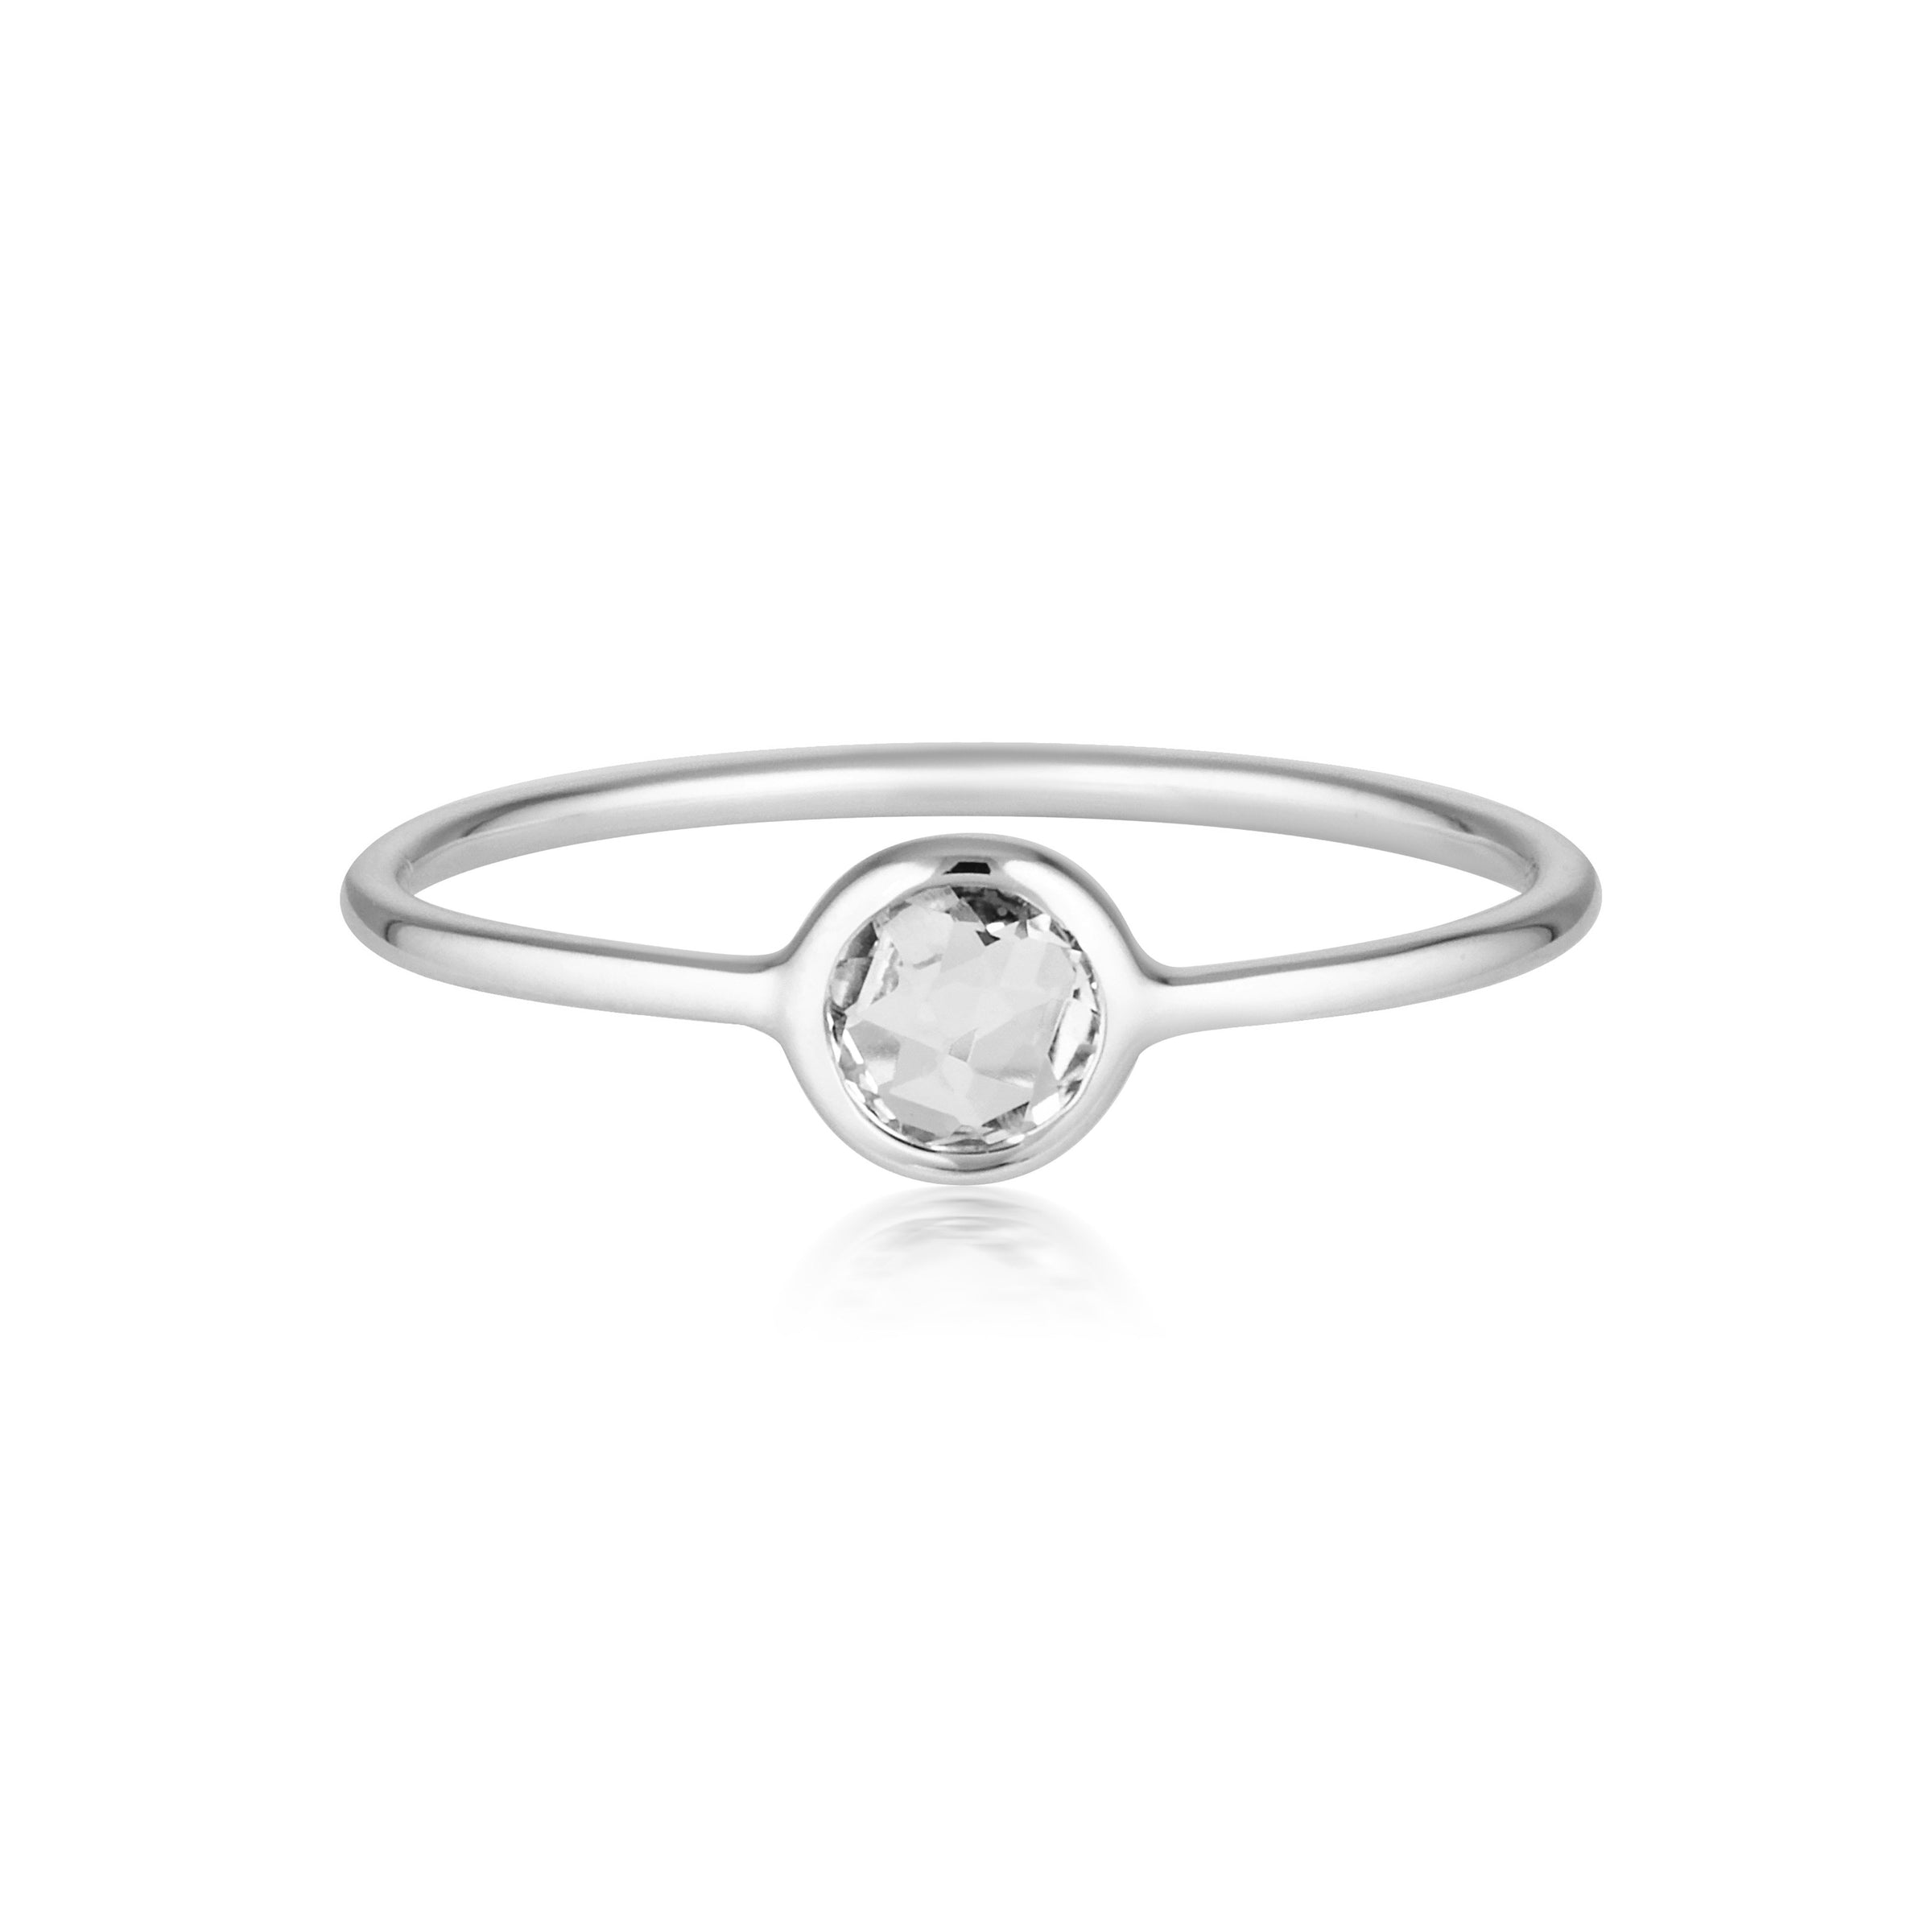 Georgini - Eos Sterling Silver White Topaz Ring Bevilles Jewellers 6 